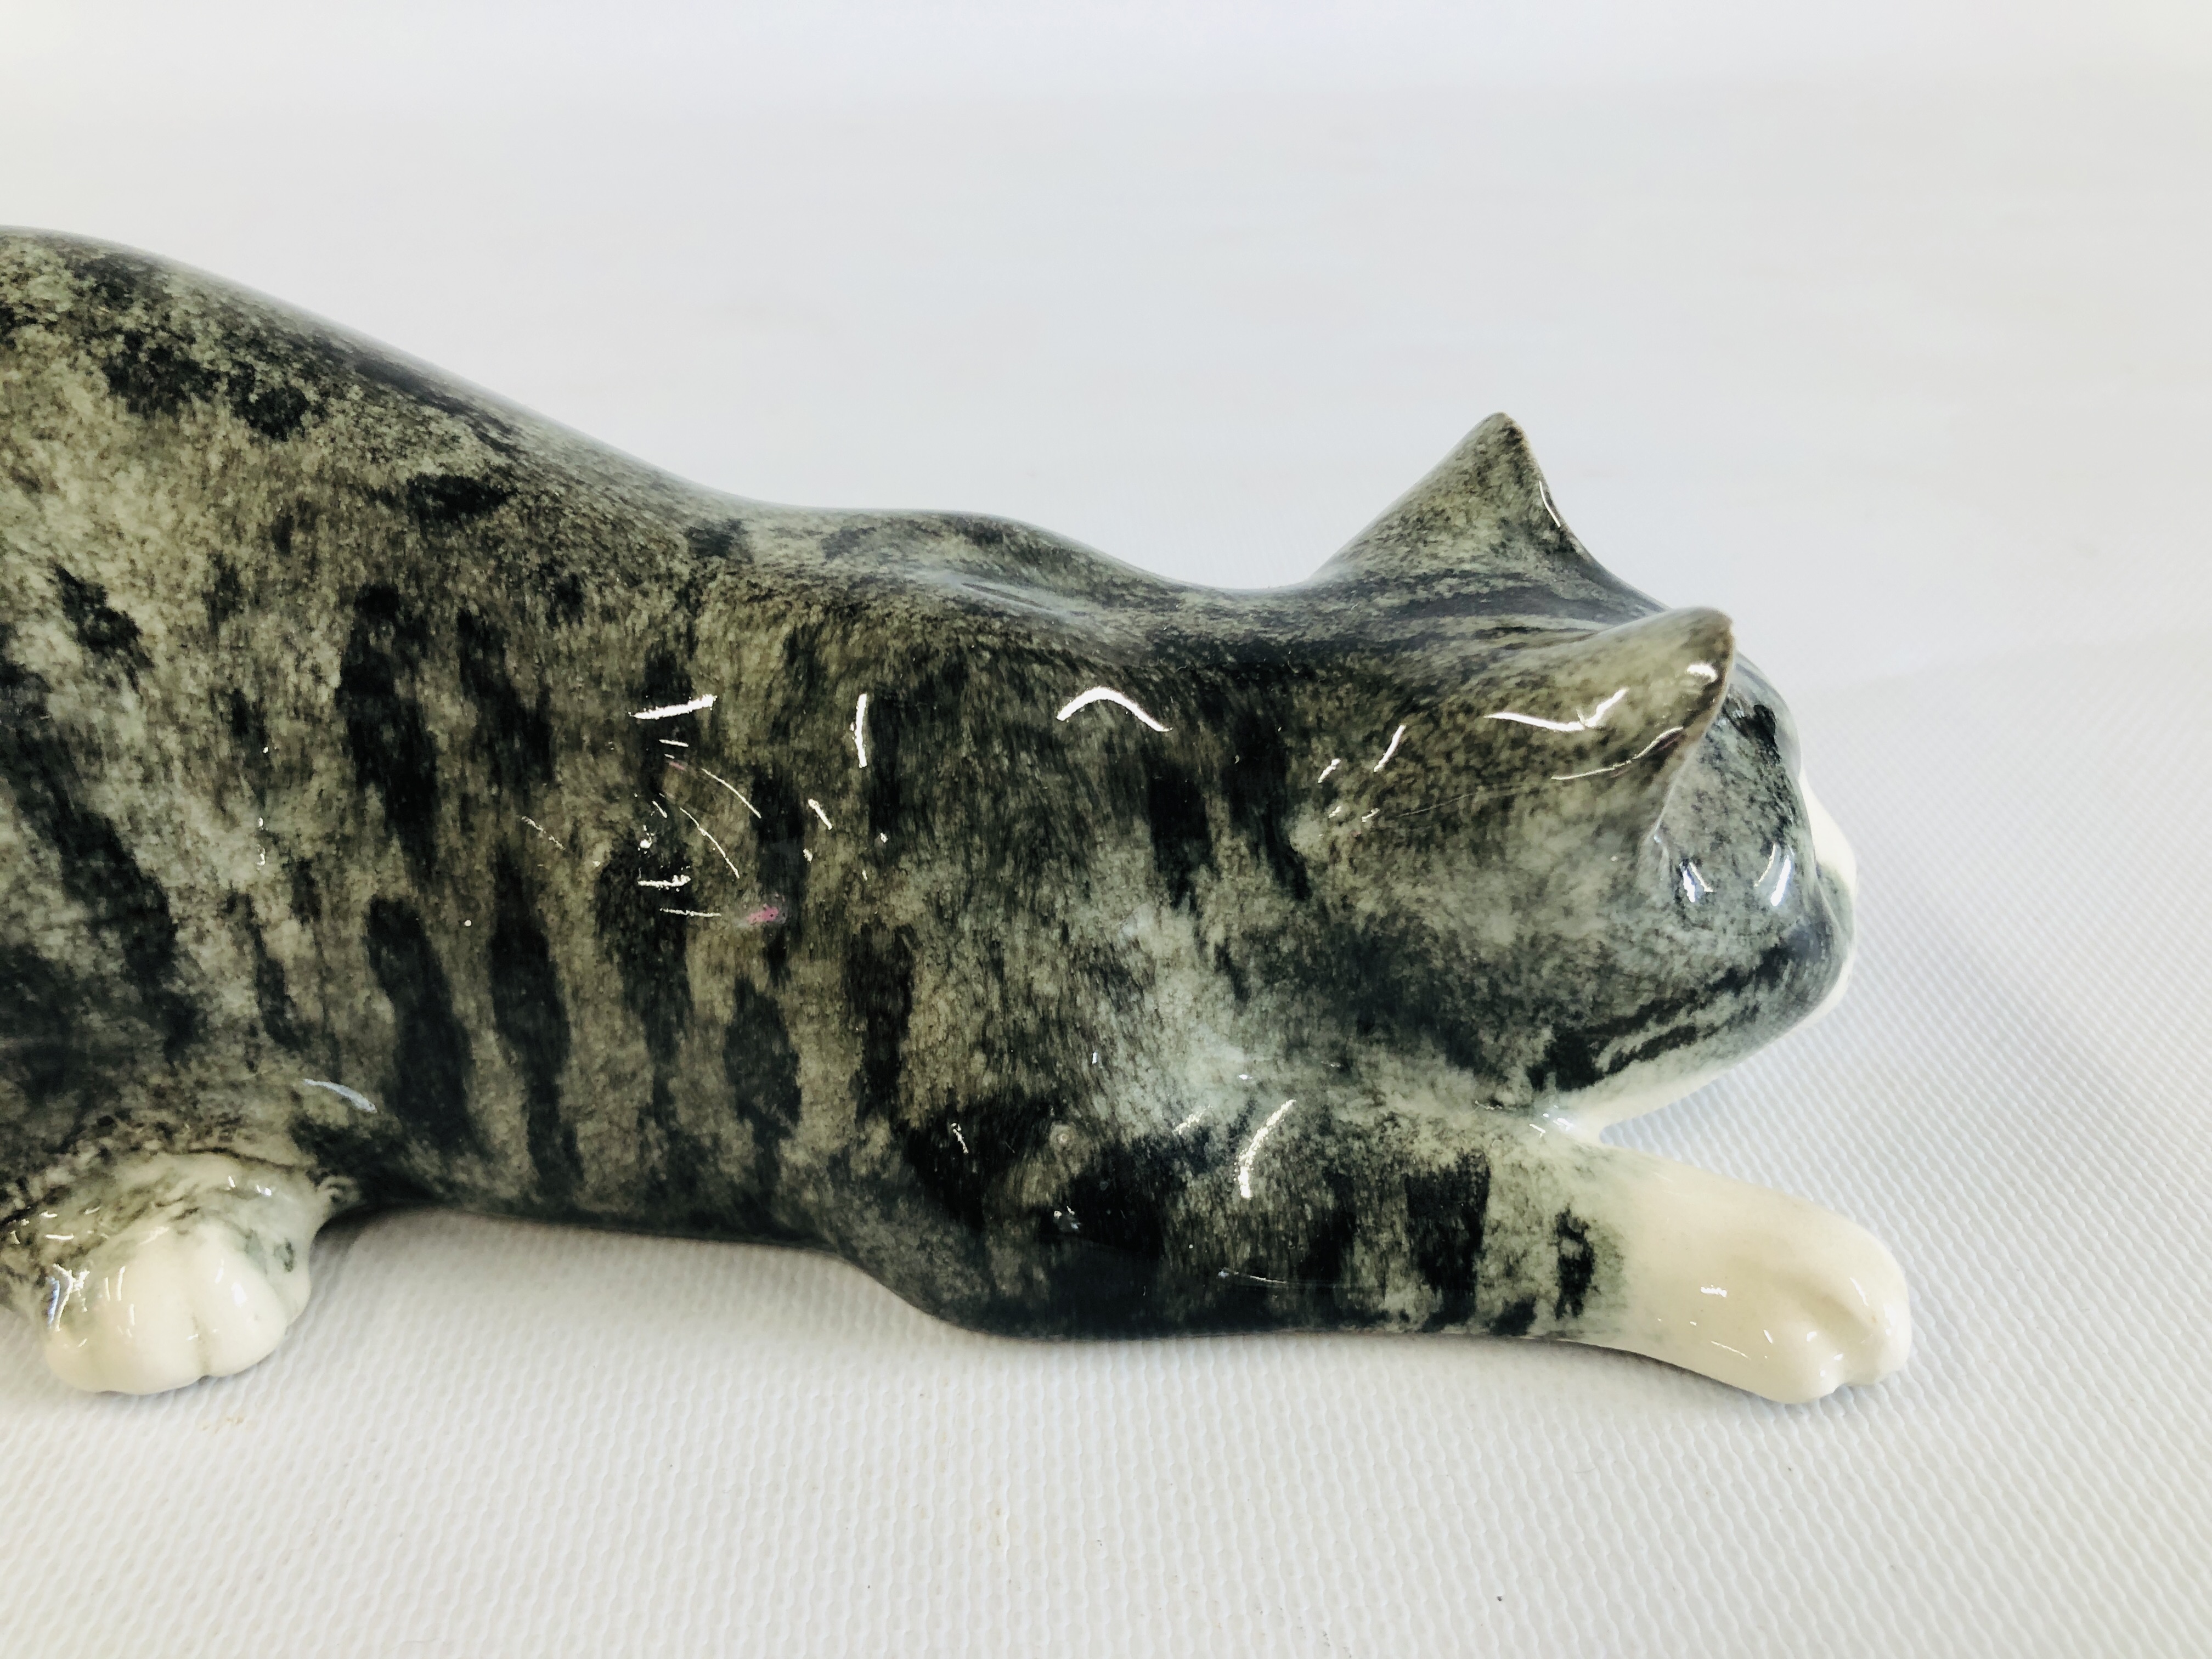 A POTTERY EXAMPLE OF A GREY CAT "READY TO PLAY" SIGNED TO THE BASE MIKE HINTON, H 8CM X L 26CM. - Image 6 of 7